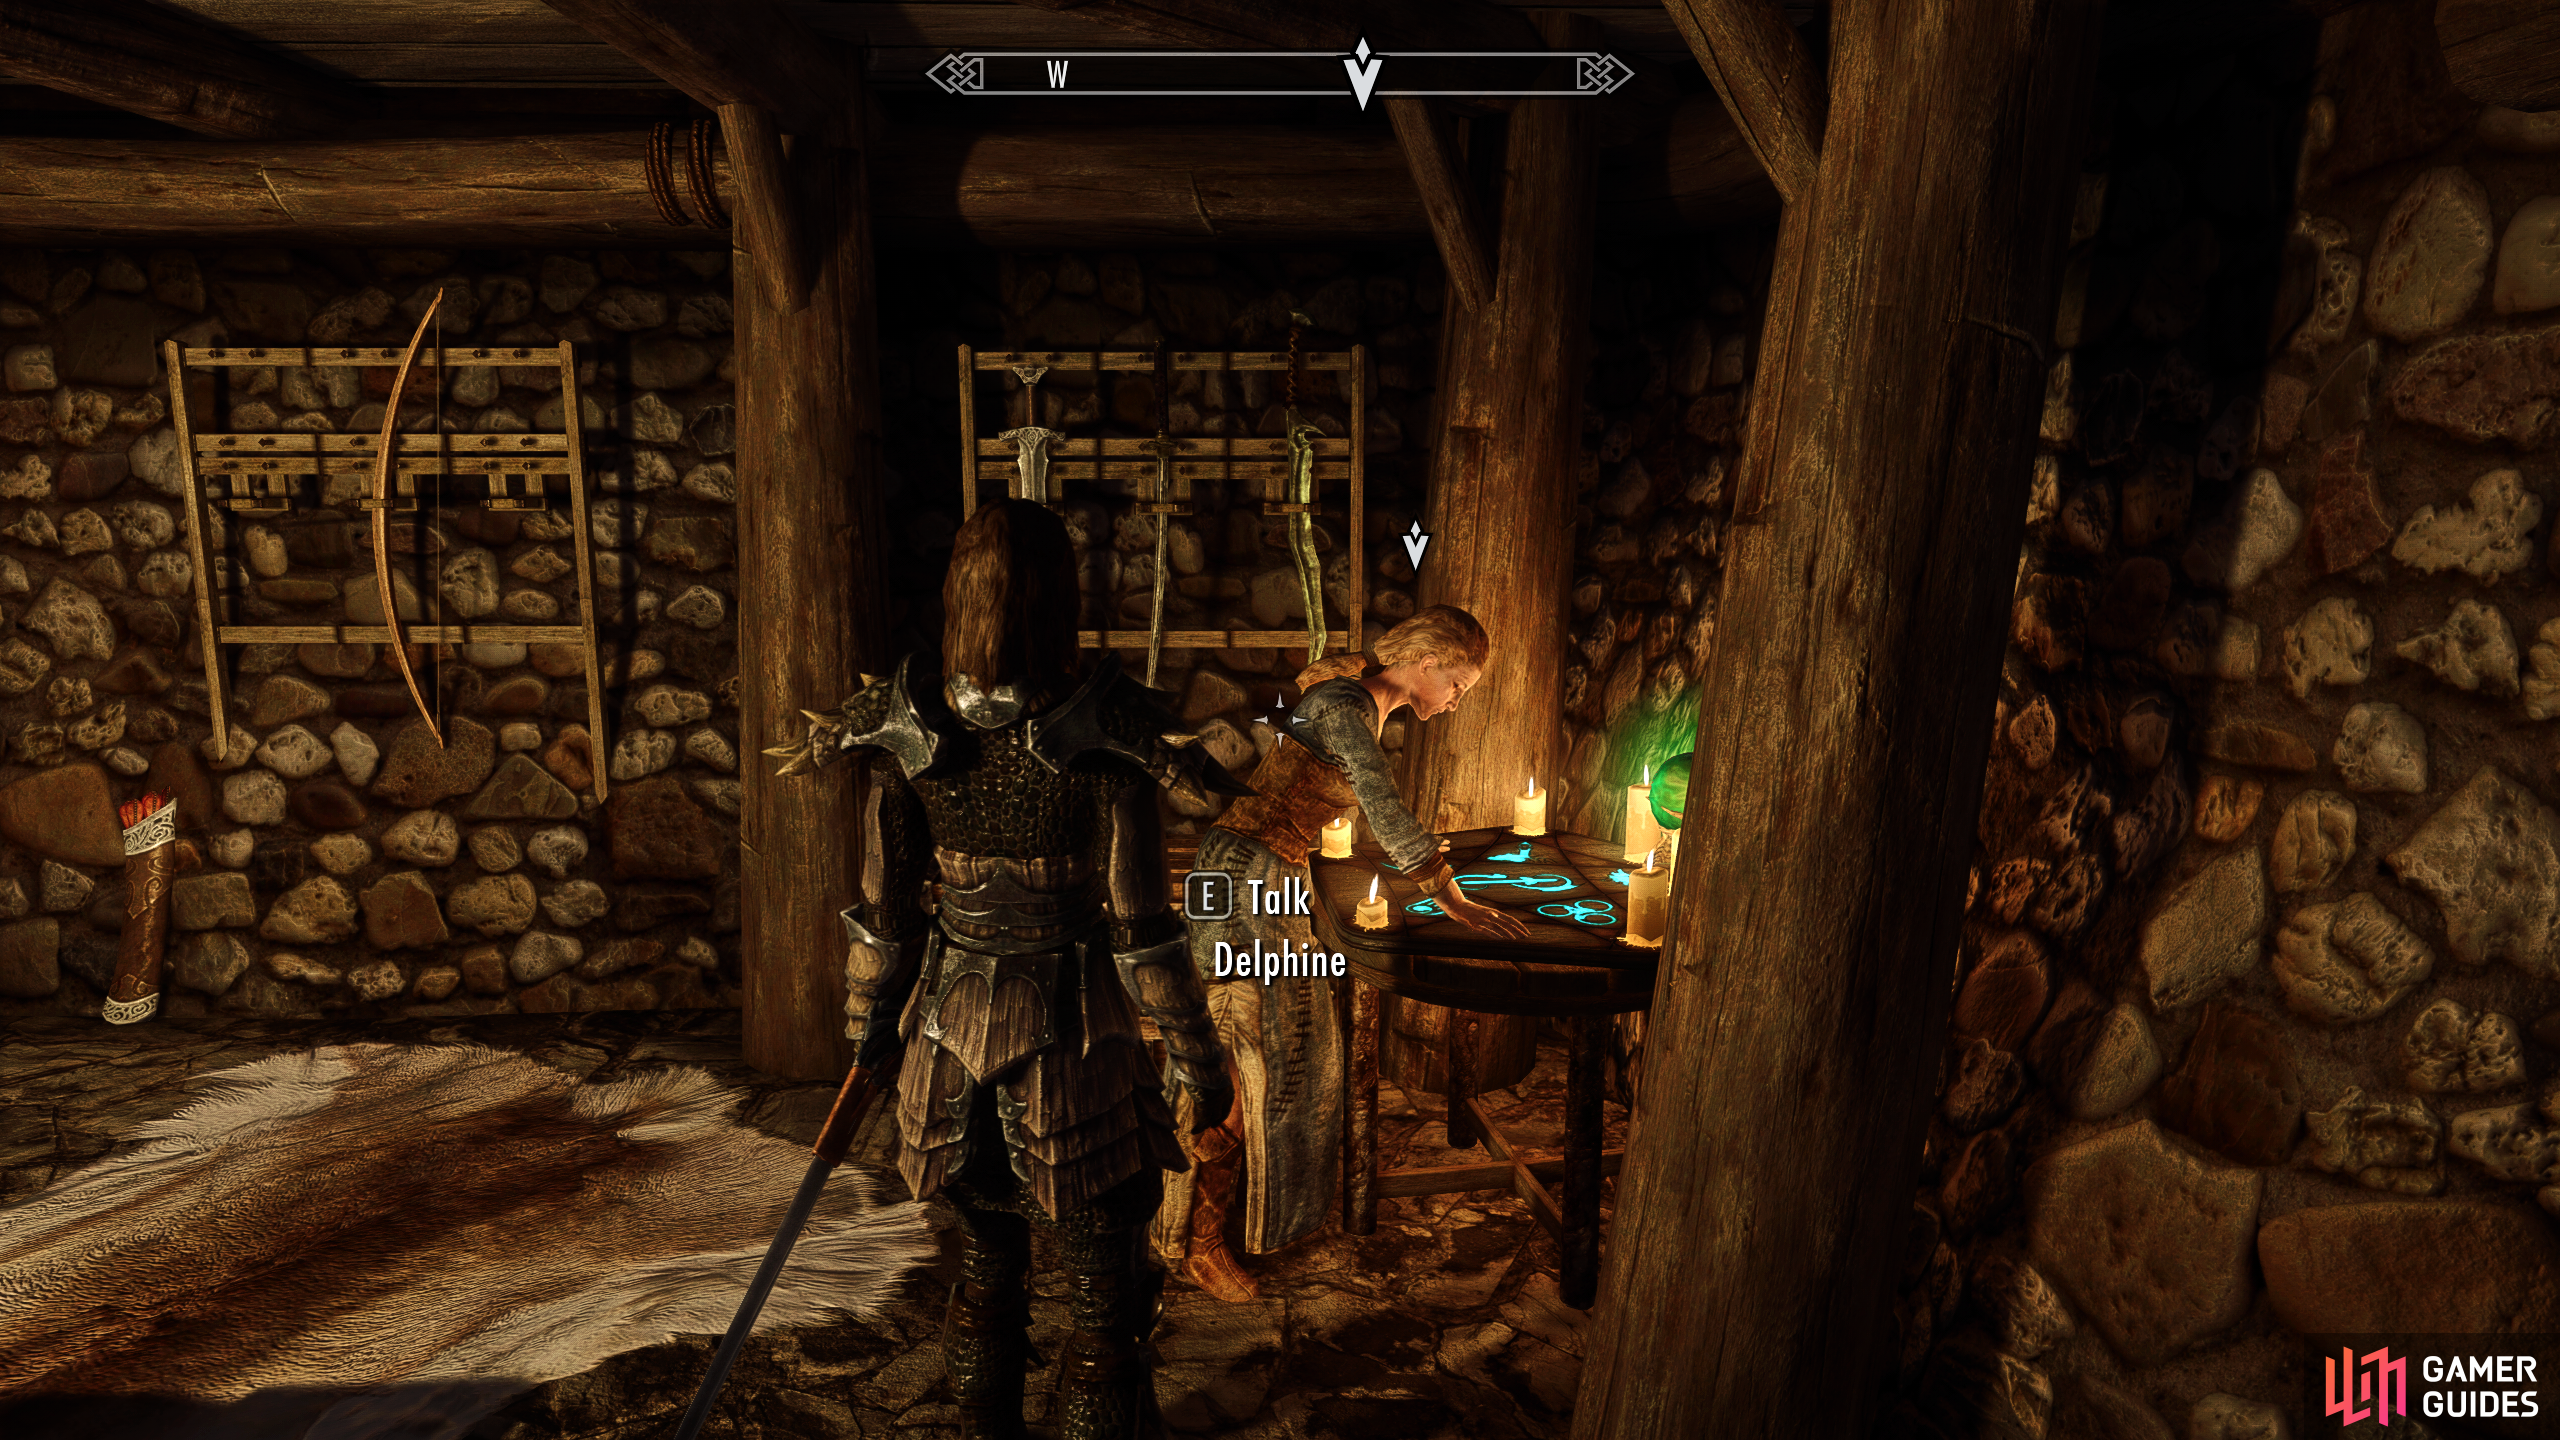 Speak with Delphine in the hidden room at the Sleeping Giant Inn in Riverwood.